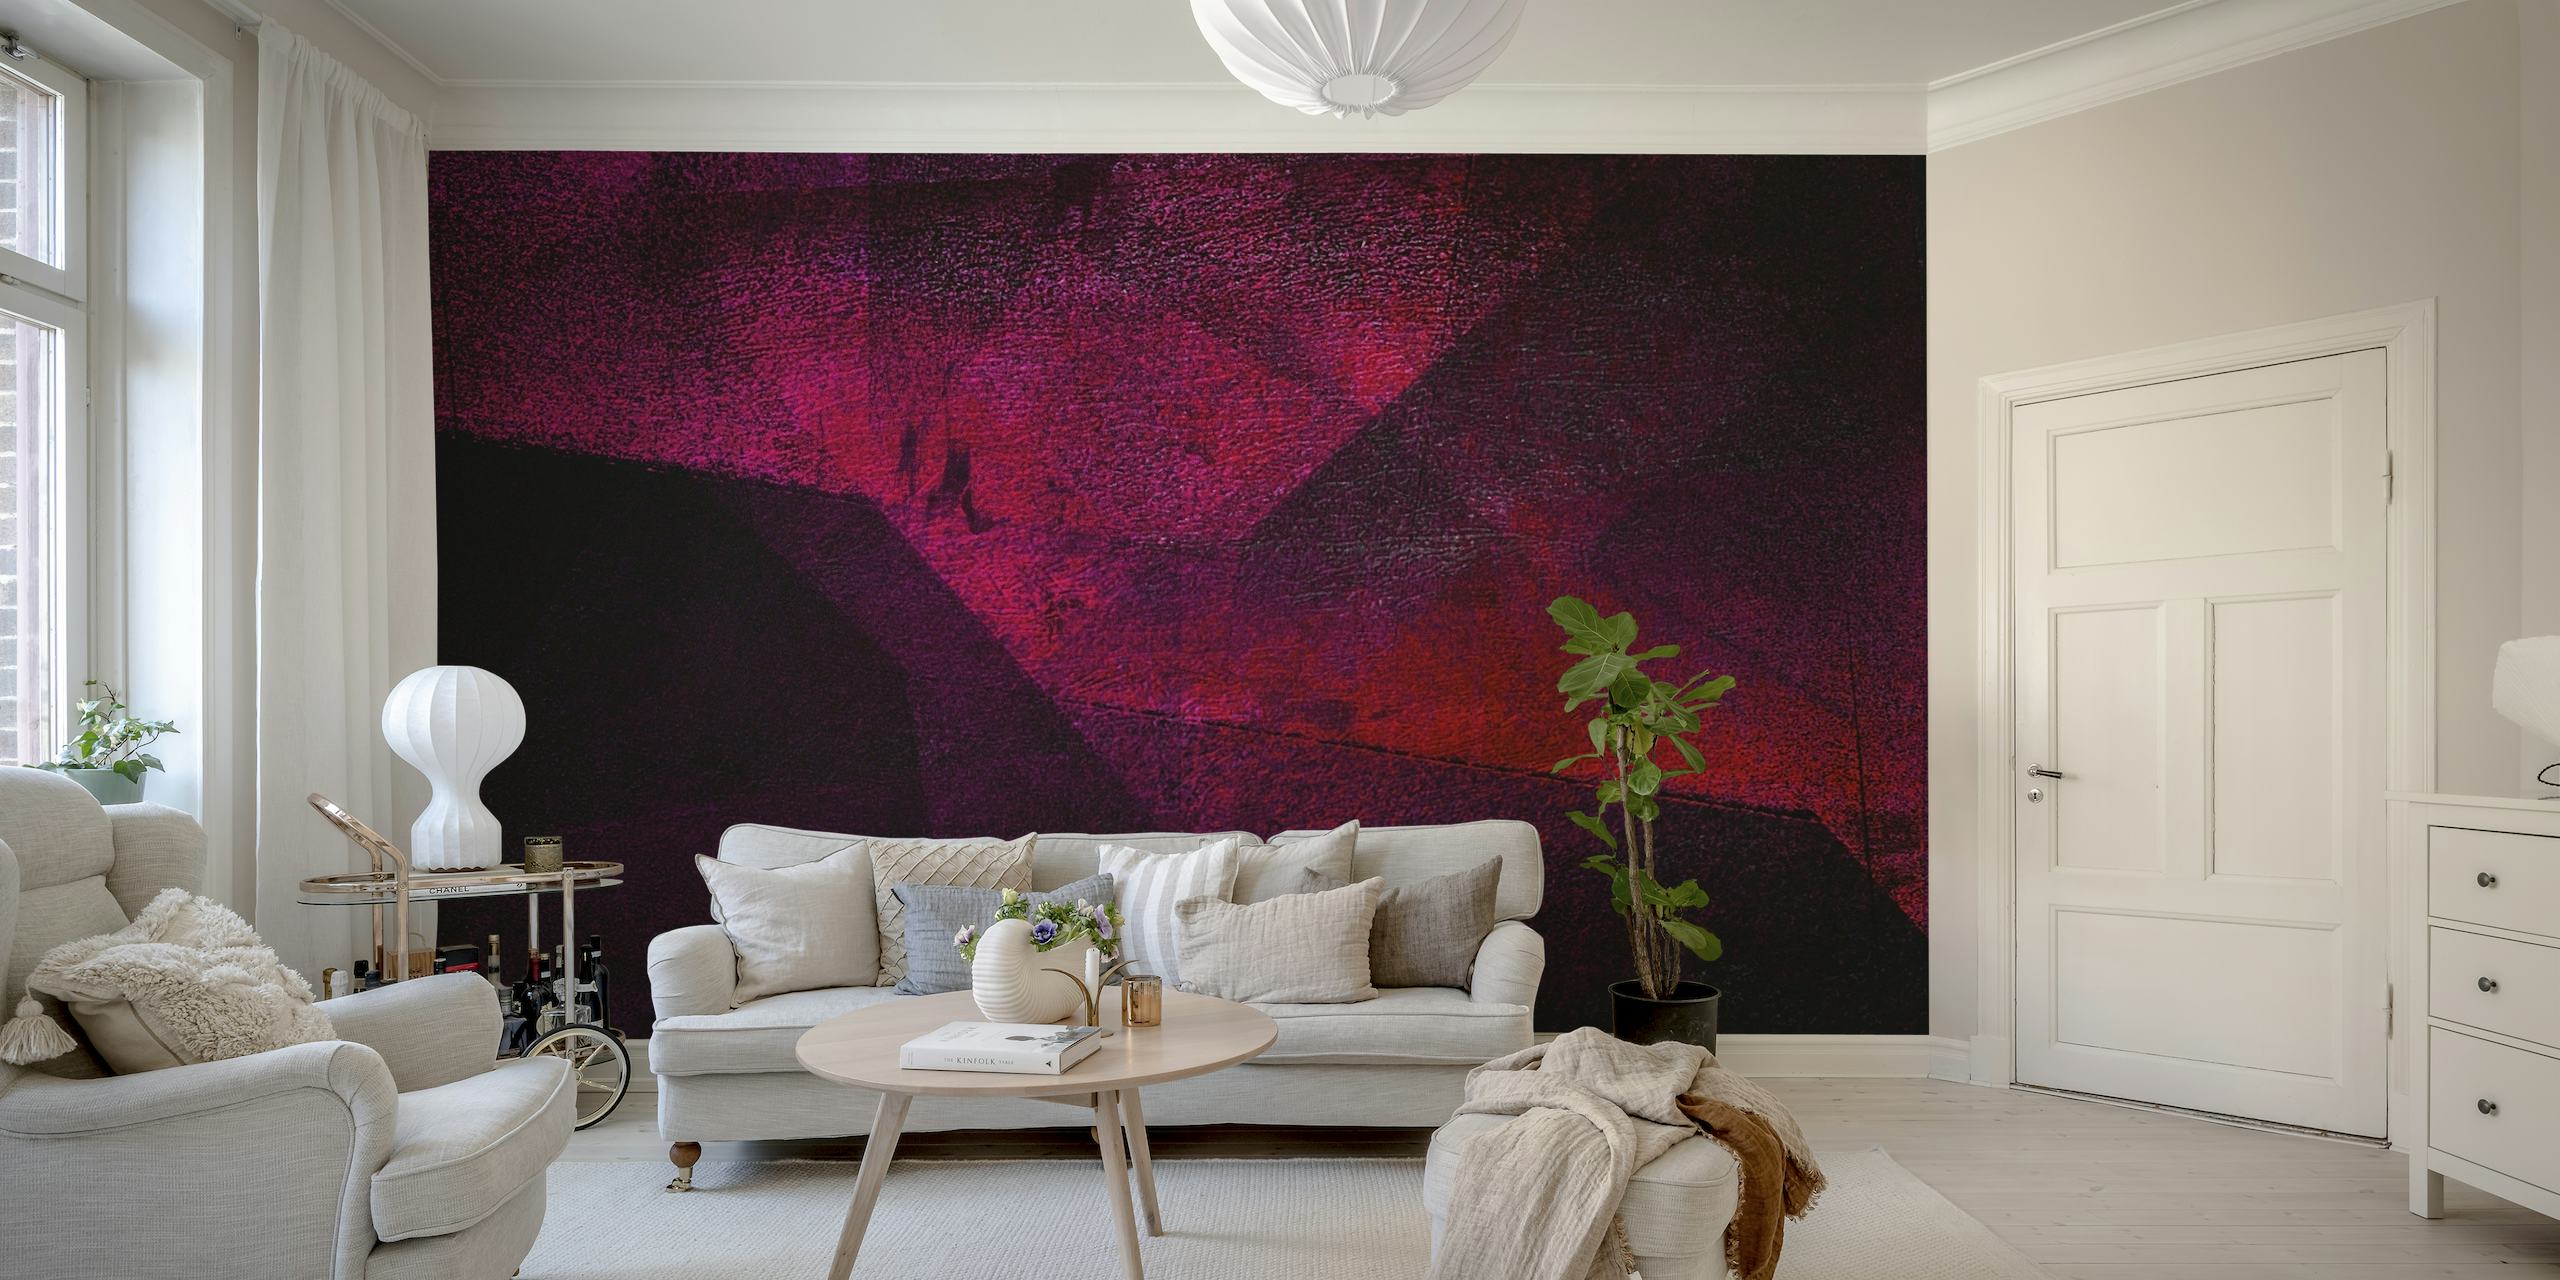 Mystic Ruby Red abstract wall mural with deep red shades and shadow play